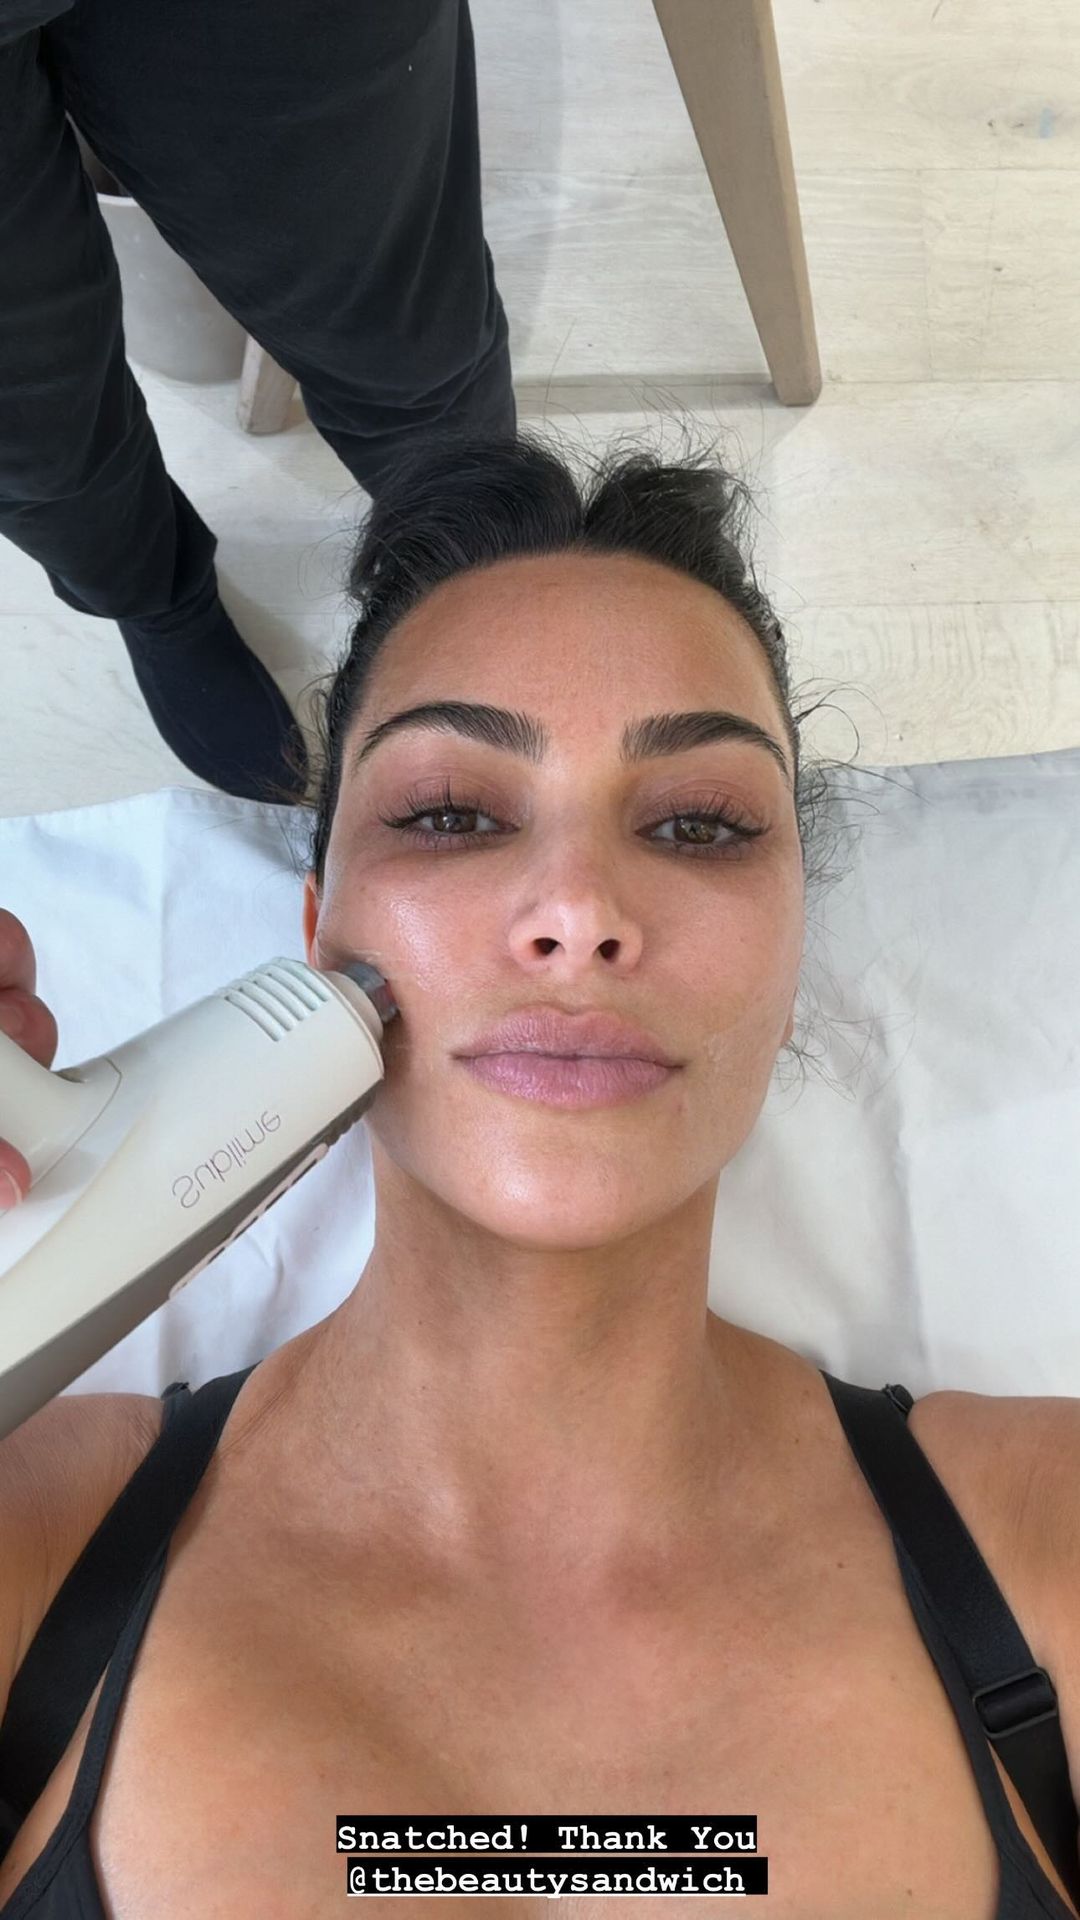 Over the weekend, Kim gave fans a glimpse at her makeup-free face